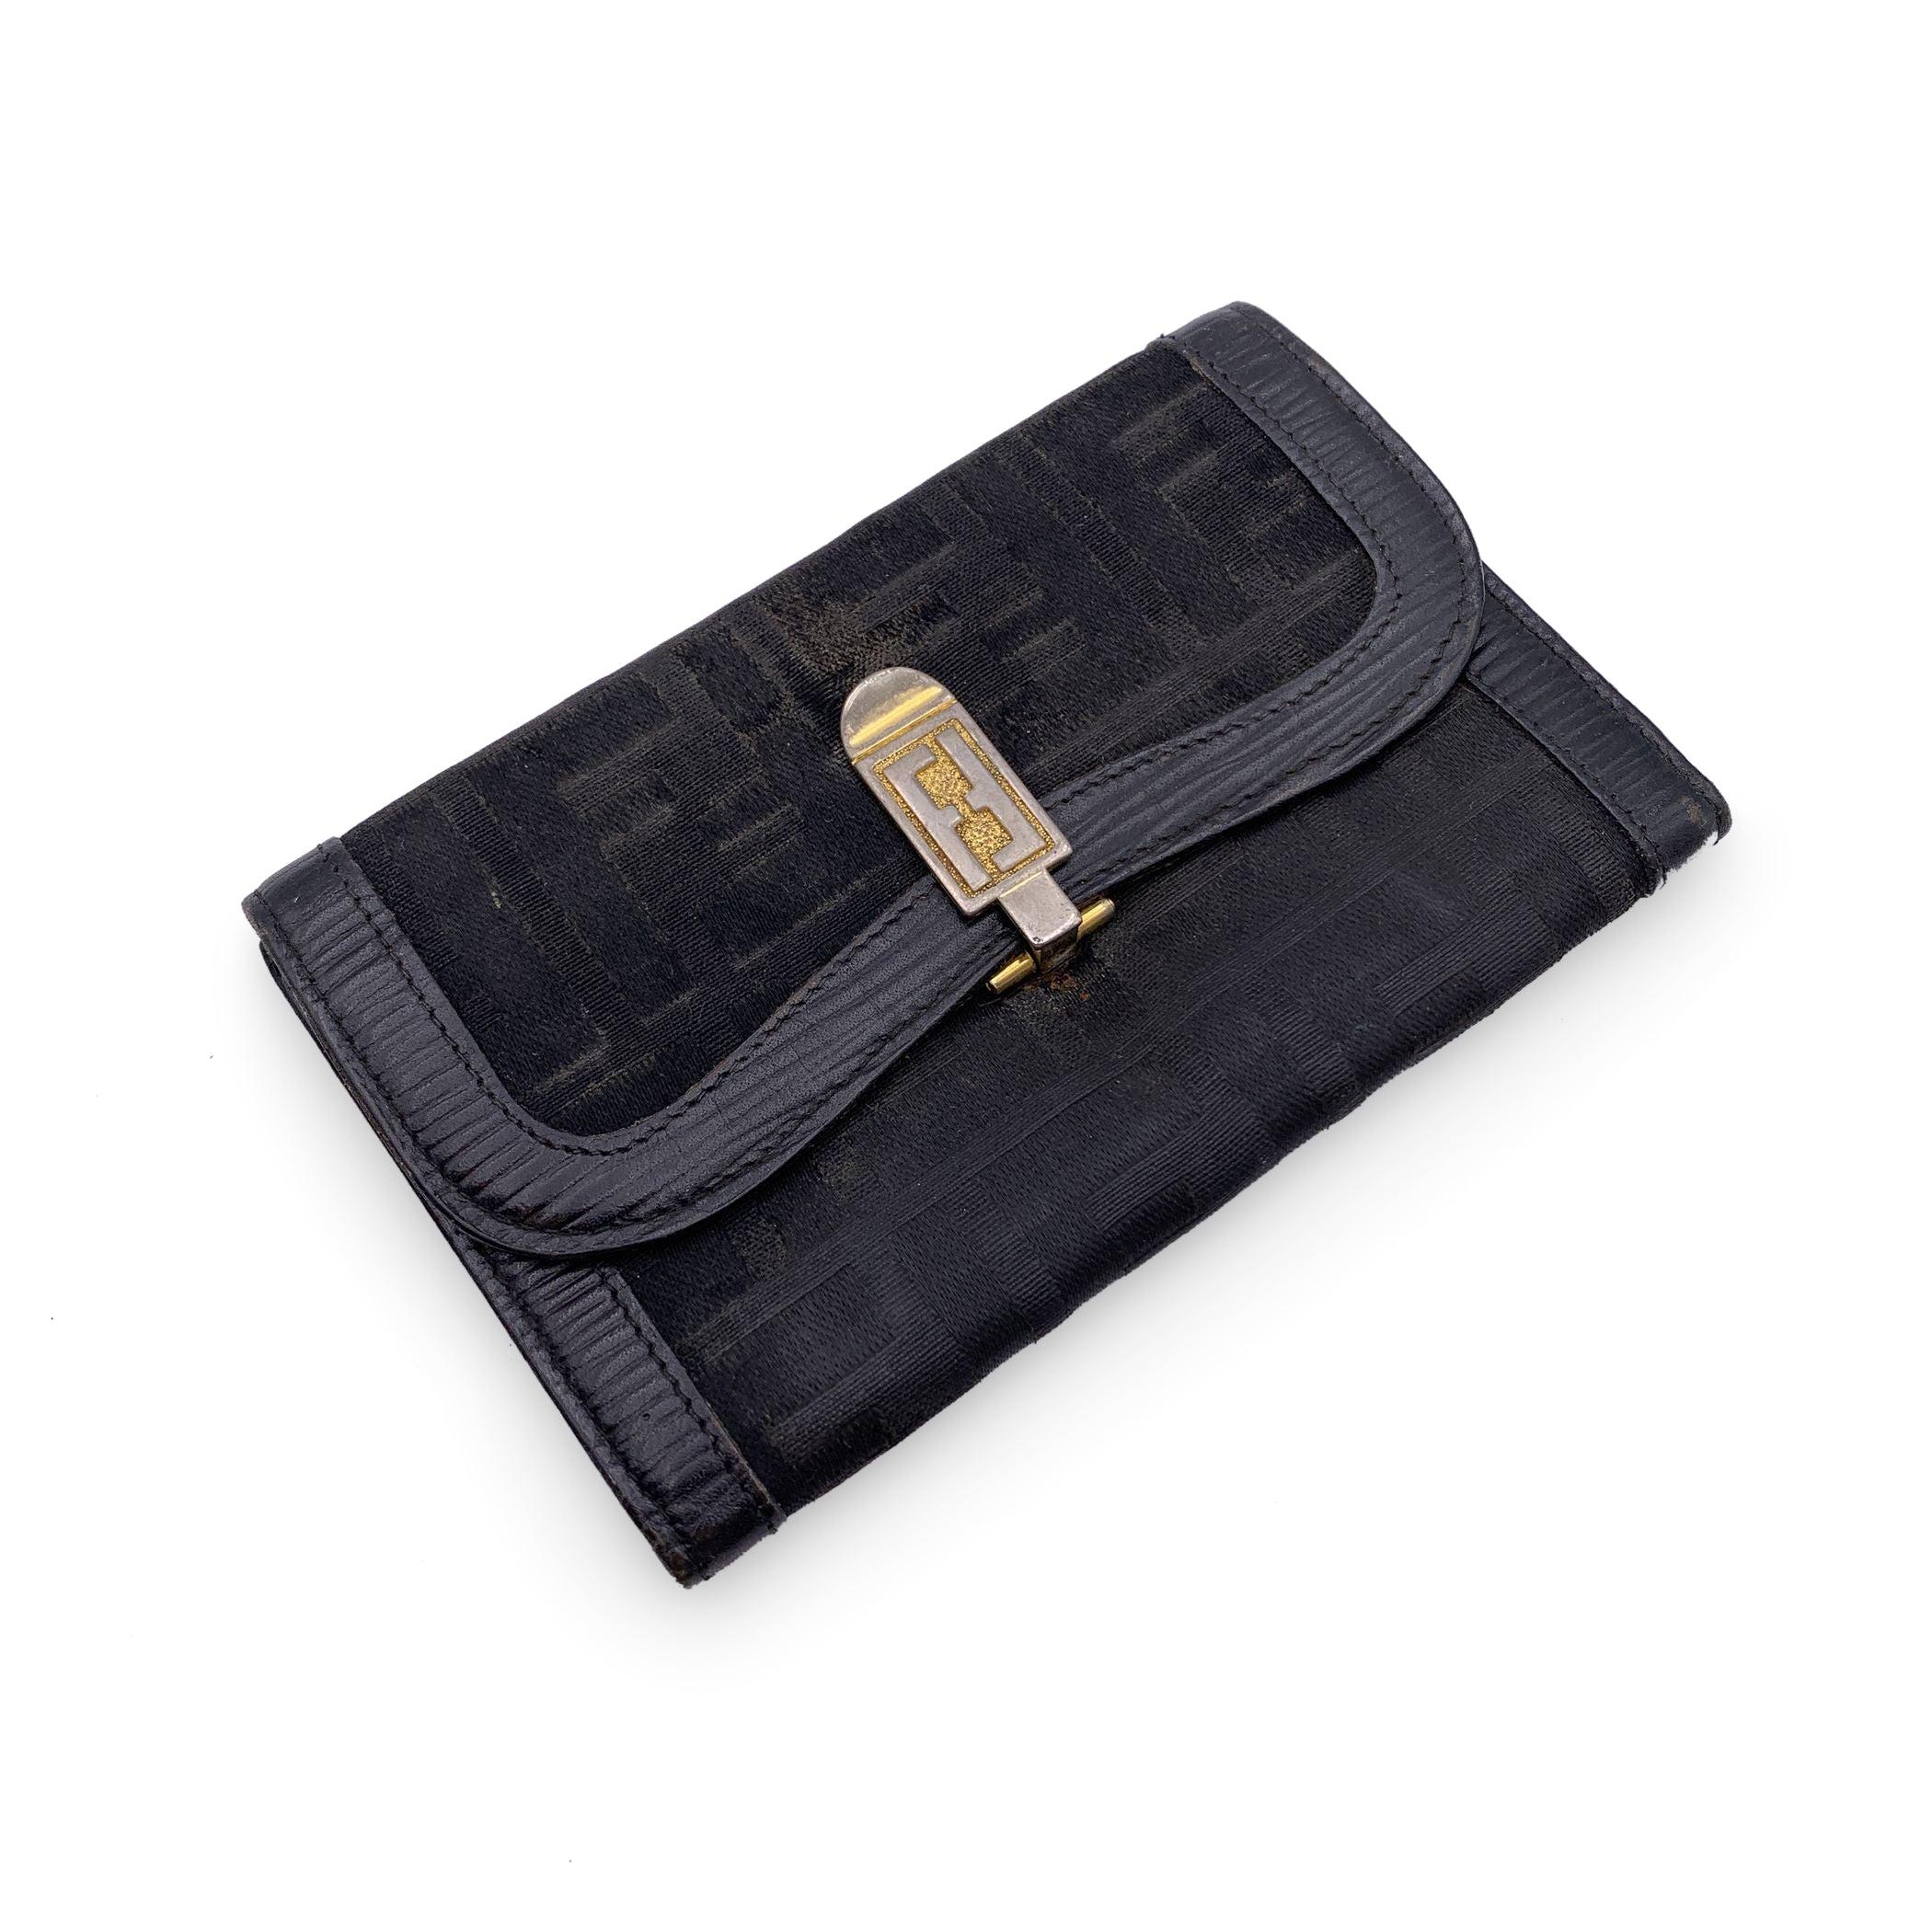 Vintage Fendi wallet in black monogram canvas with leather trim. Flap with clasp closure. 3 open pockets and 1 pocket with button closure inside. Clasp closure with FF logo on the front. Leather lining. 'Fendi s.a.s Roma - Made in Italy' embossed